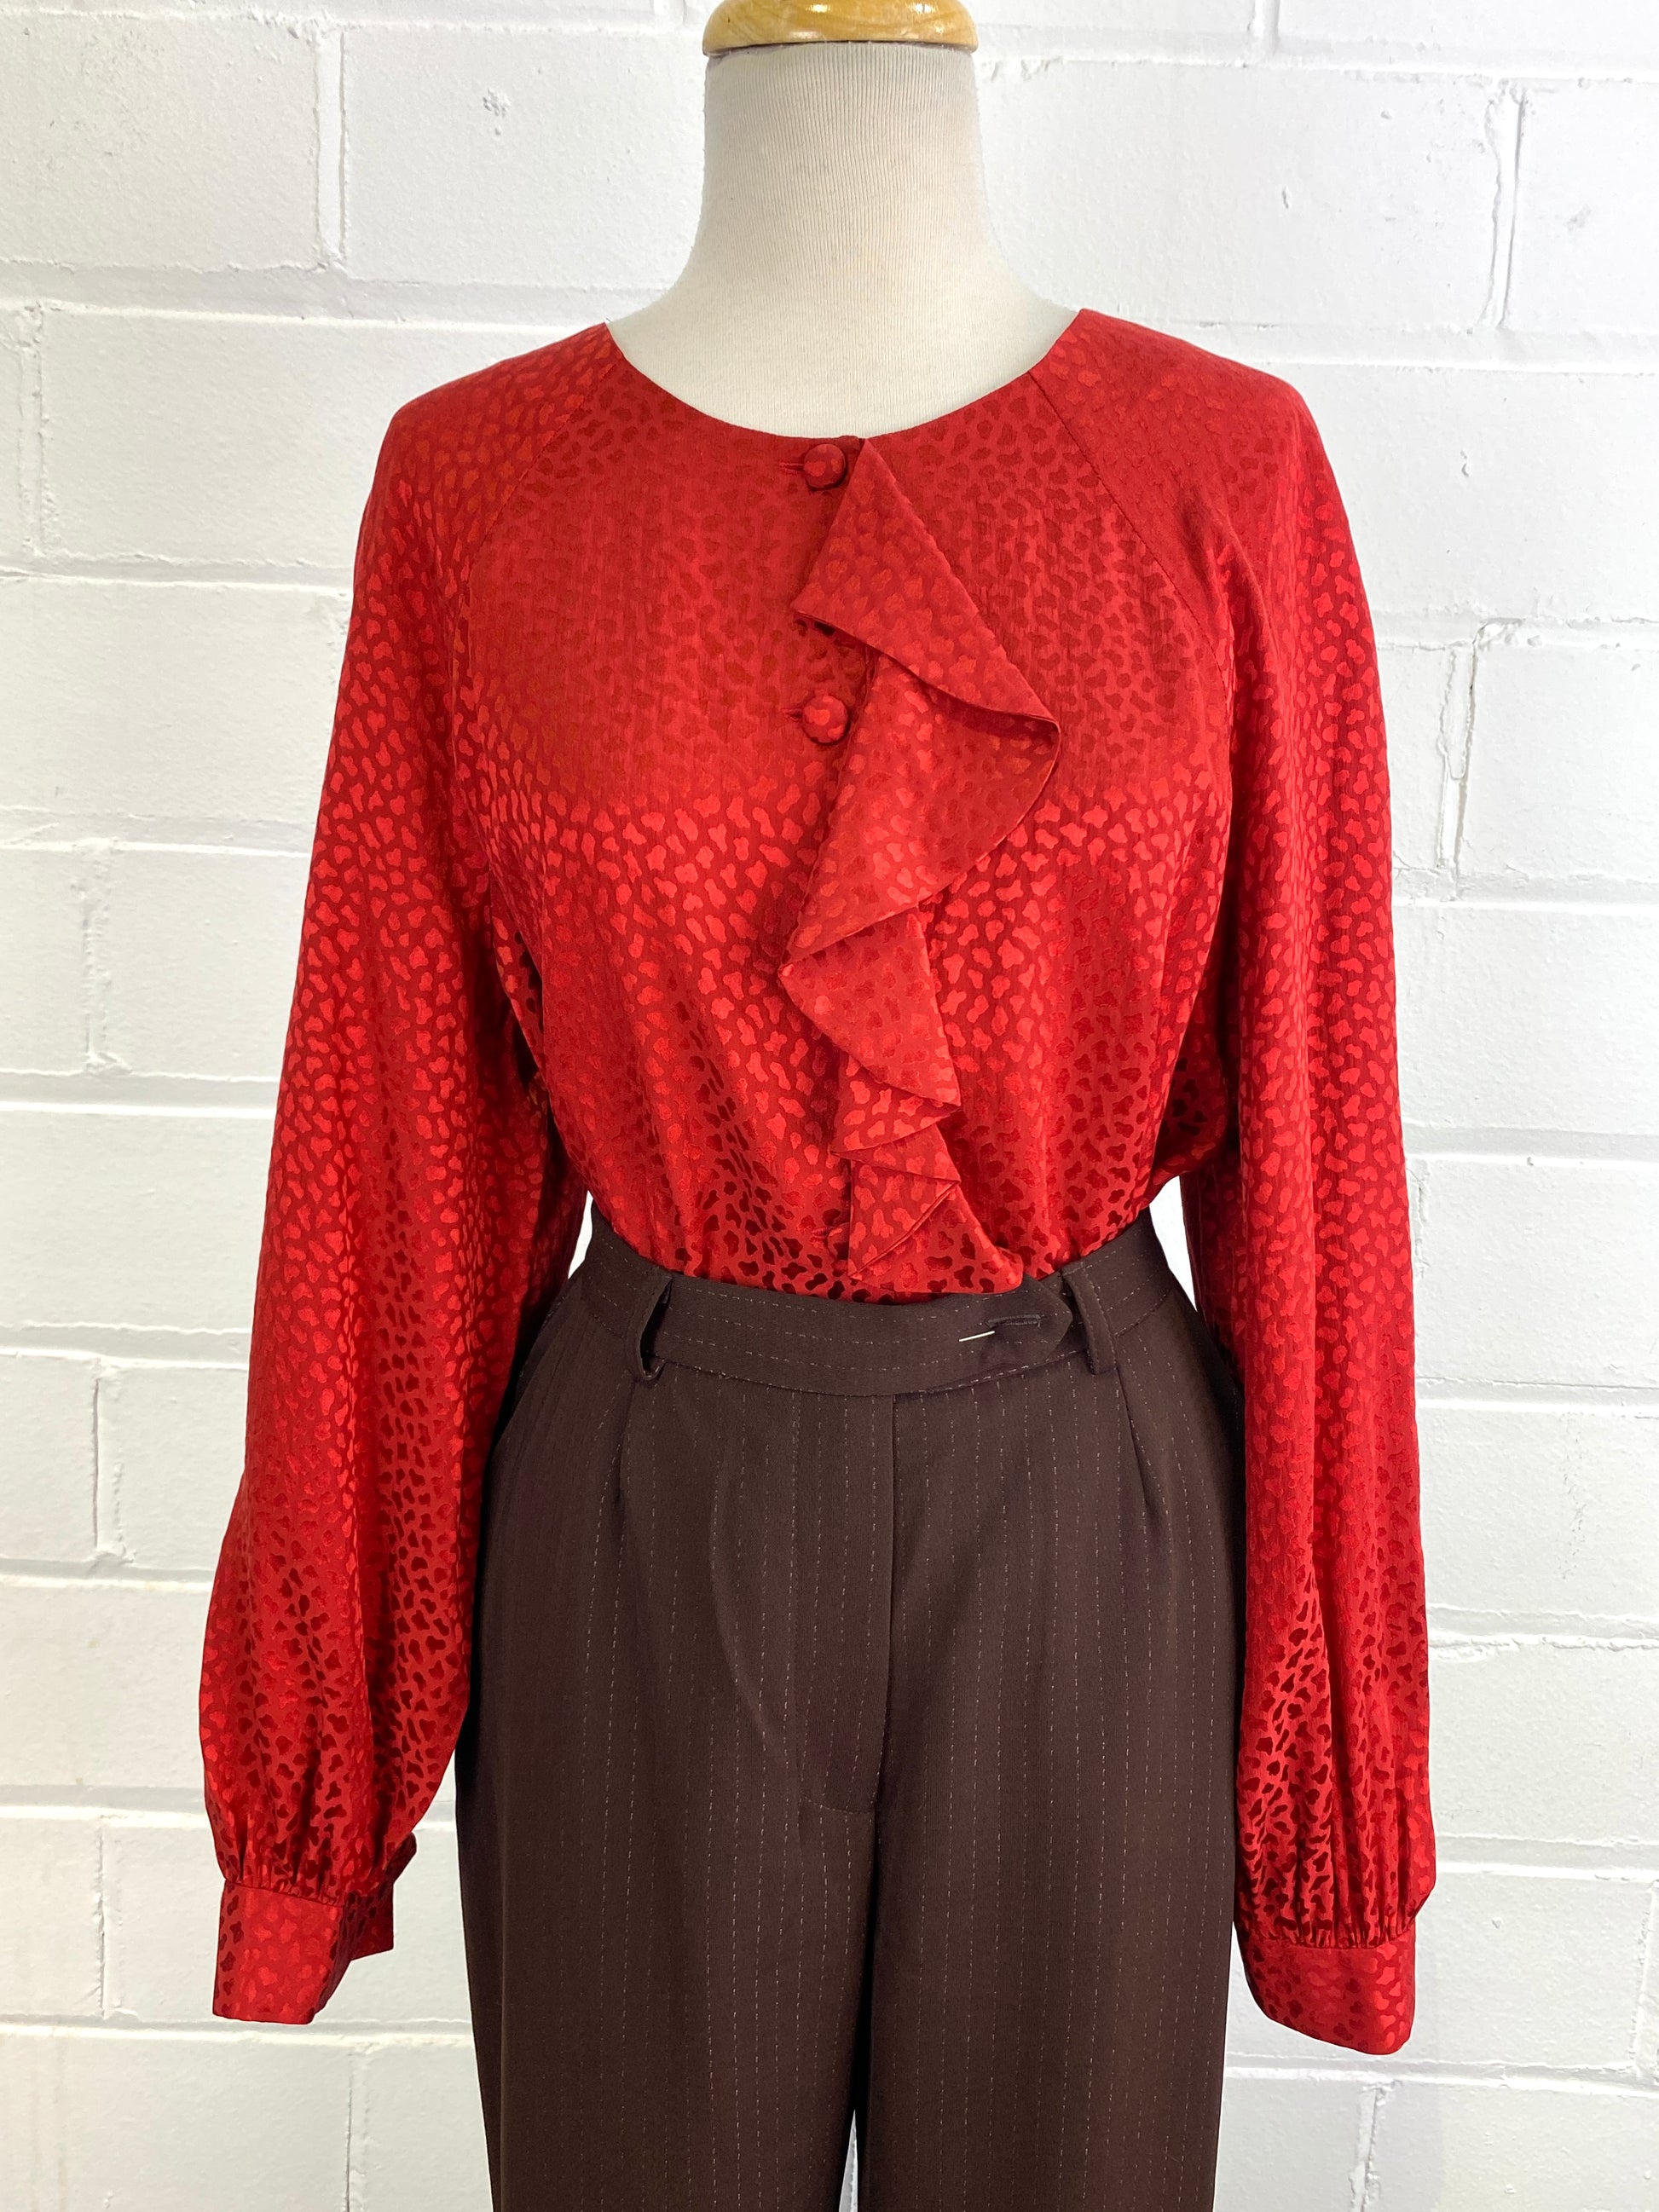 Vintage 1980s Red Leopard Print Silk Ruffle Blouse, Large 